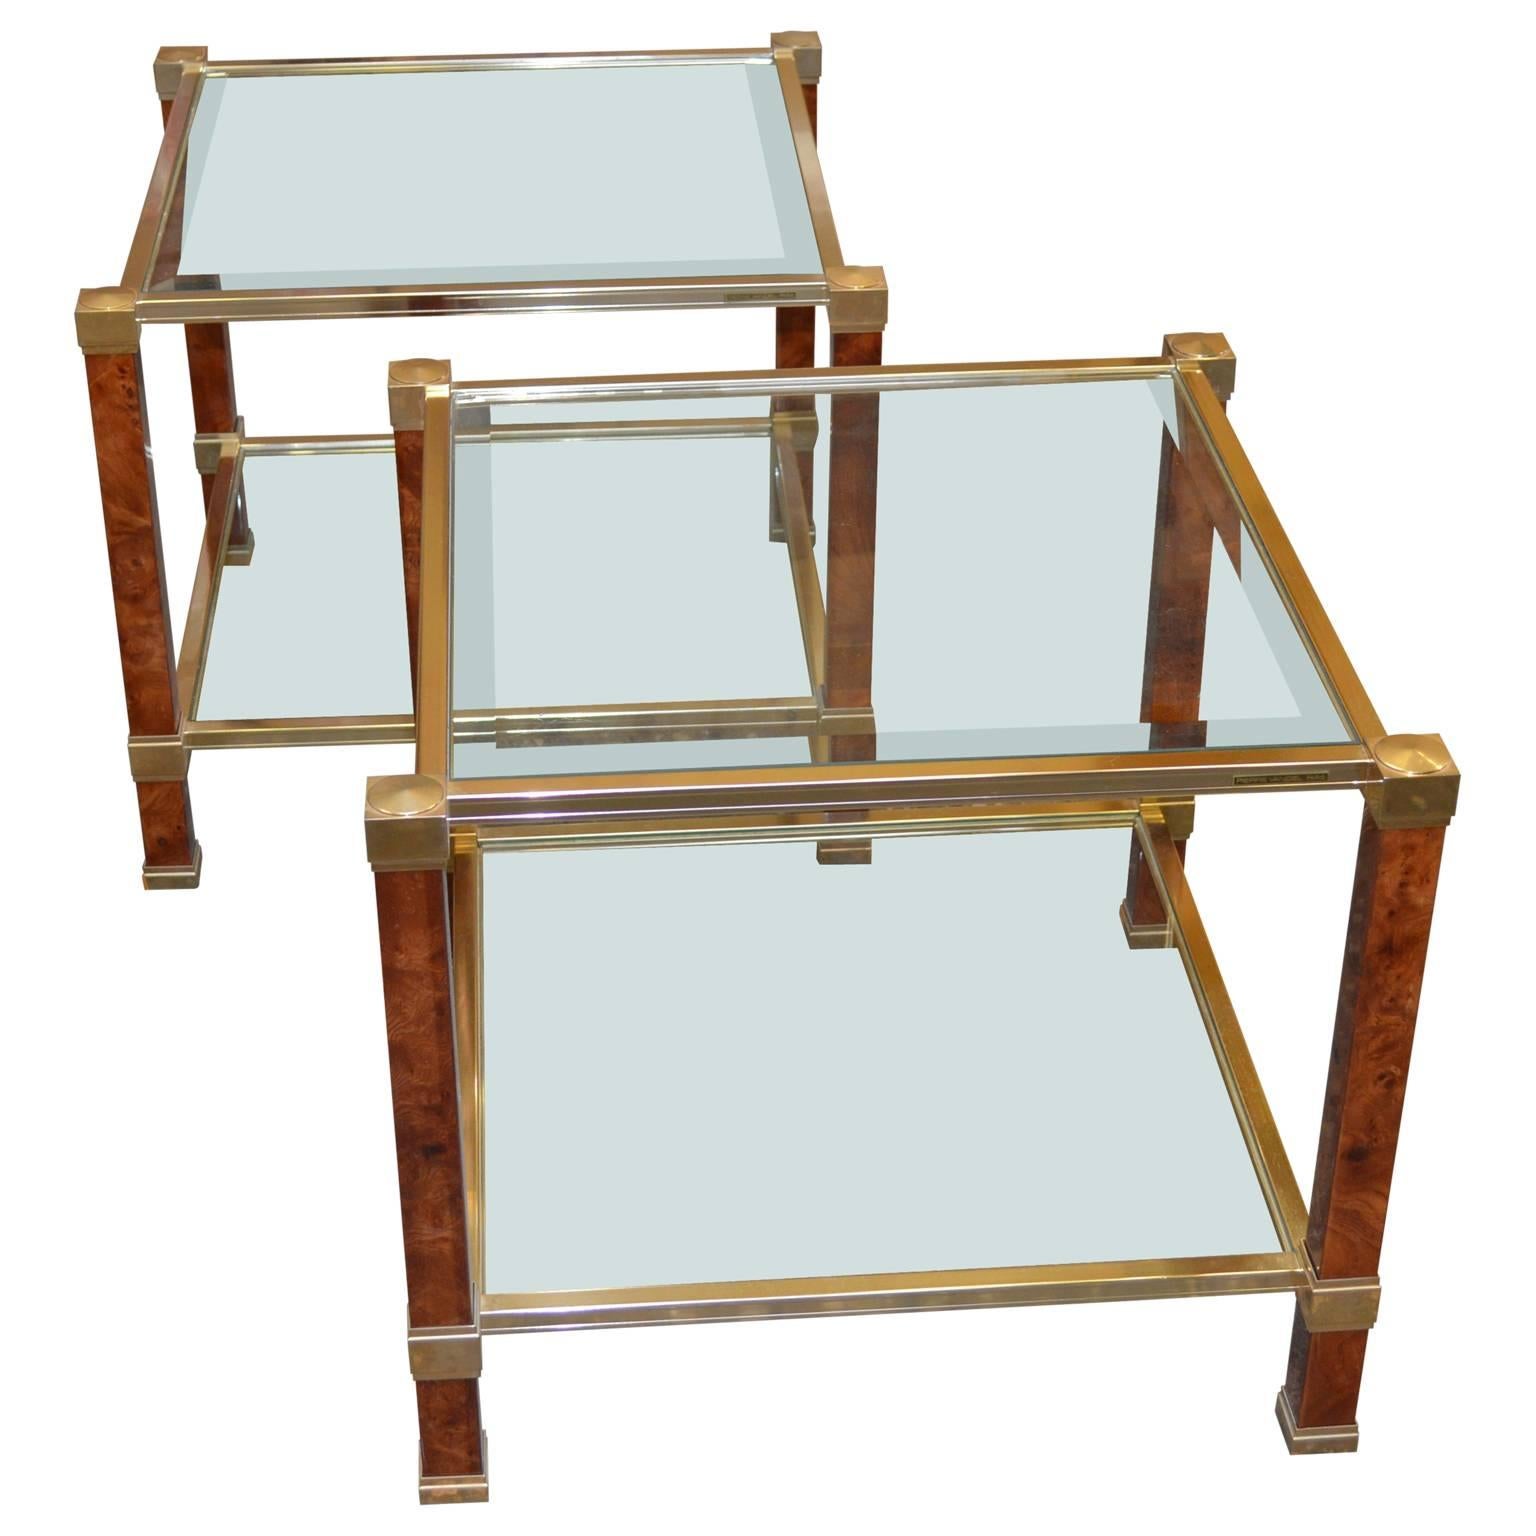 This brass and glass cocktail, or coffee table, comes with a beveled glass top, and side tables, or lamp tables, comes with two tiers of beveled glass and they all features beautiful legs in bamboo maple look.
The table is signed and papers of